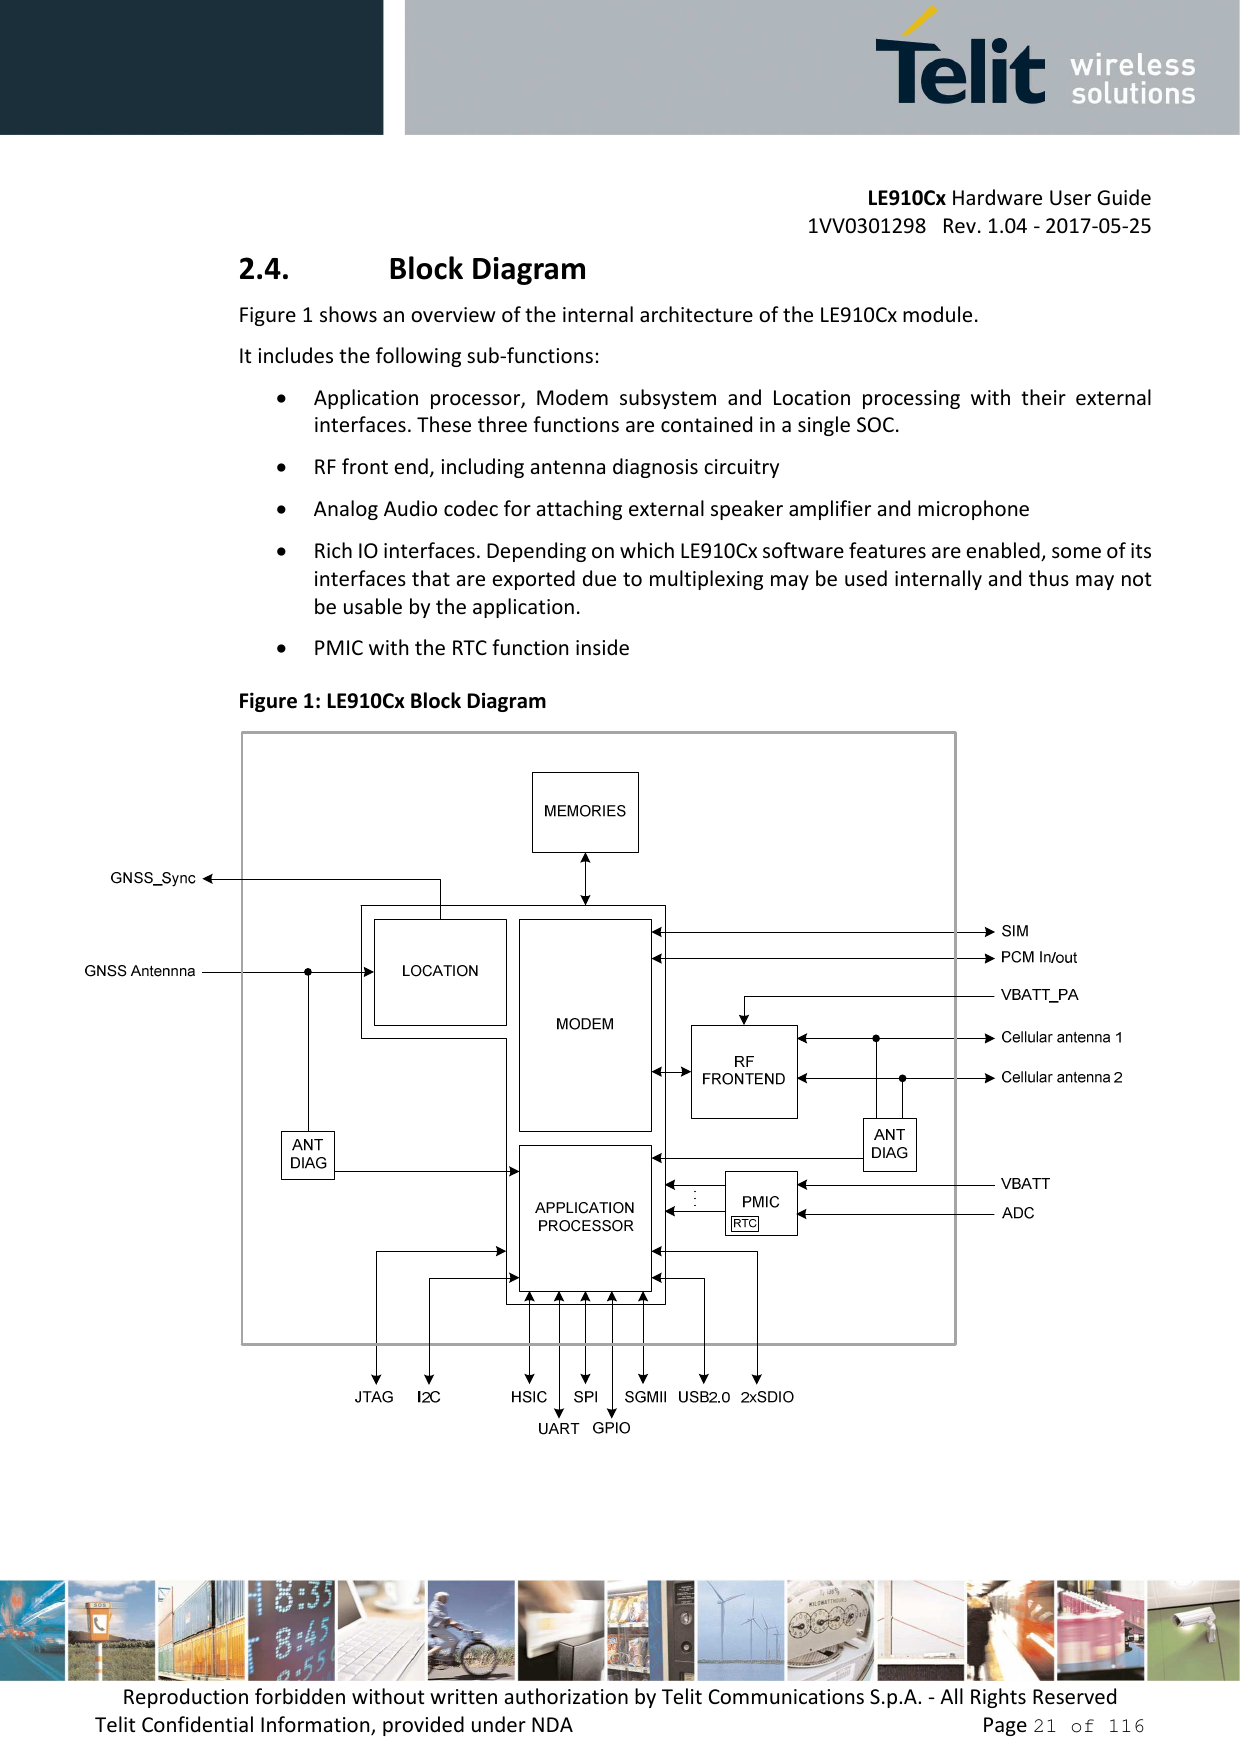         LE910Cx Hardware User Guide 1VV0301298   Rev. 1.04 - 2017-05-25 Reproduction forbidden without written authorization by Telit Communications S.p.A. - All Rights Reserved Telit Confidential Information, provided under NDA                 Page 21 of 116 2.4. Block Diagram Figure 1 shows an overview of the internal architecture of the LE910Cx module.  It includes the following sub-functions: • Application  processor,  Modem  subsystem  and  Location  processing  with  their  external interfaces. These three functions are contained in a single SOC. • RF front end, including antenna diagnosis circuitry • Analog Audio codec for attaching external speaker amplifier and microphone • Rich IO interfaces. Depending on which LE910Cx software features are enabled, some of its interfaces that are exported due to multiplexing may be used internally and thus may not be usable by the application. • PMIC with the RTC function inside  Figure 1: LE910Cx Block Diagram     